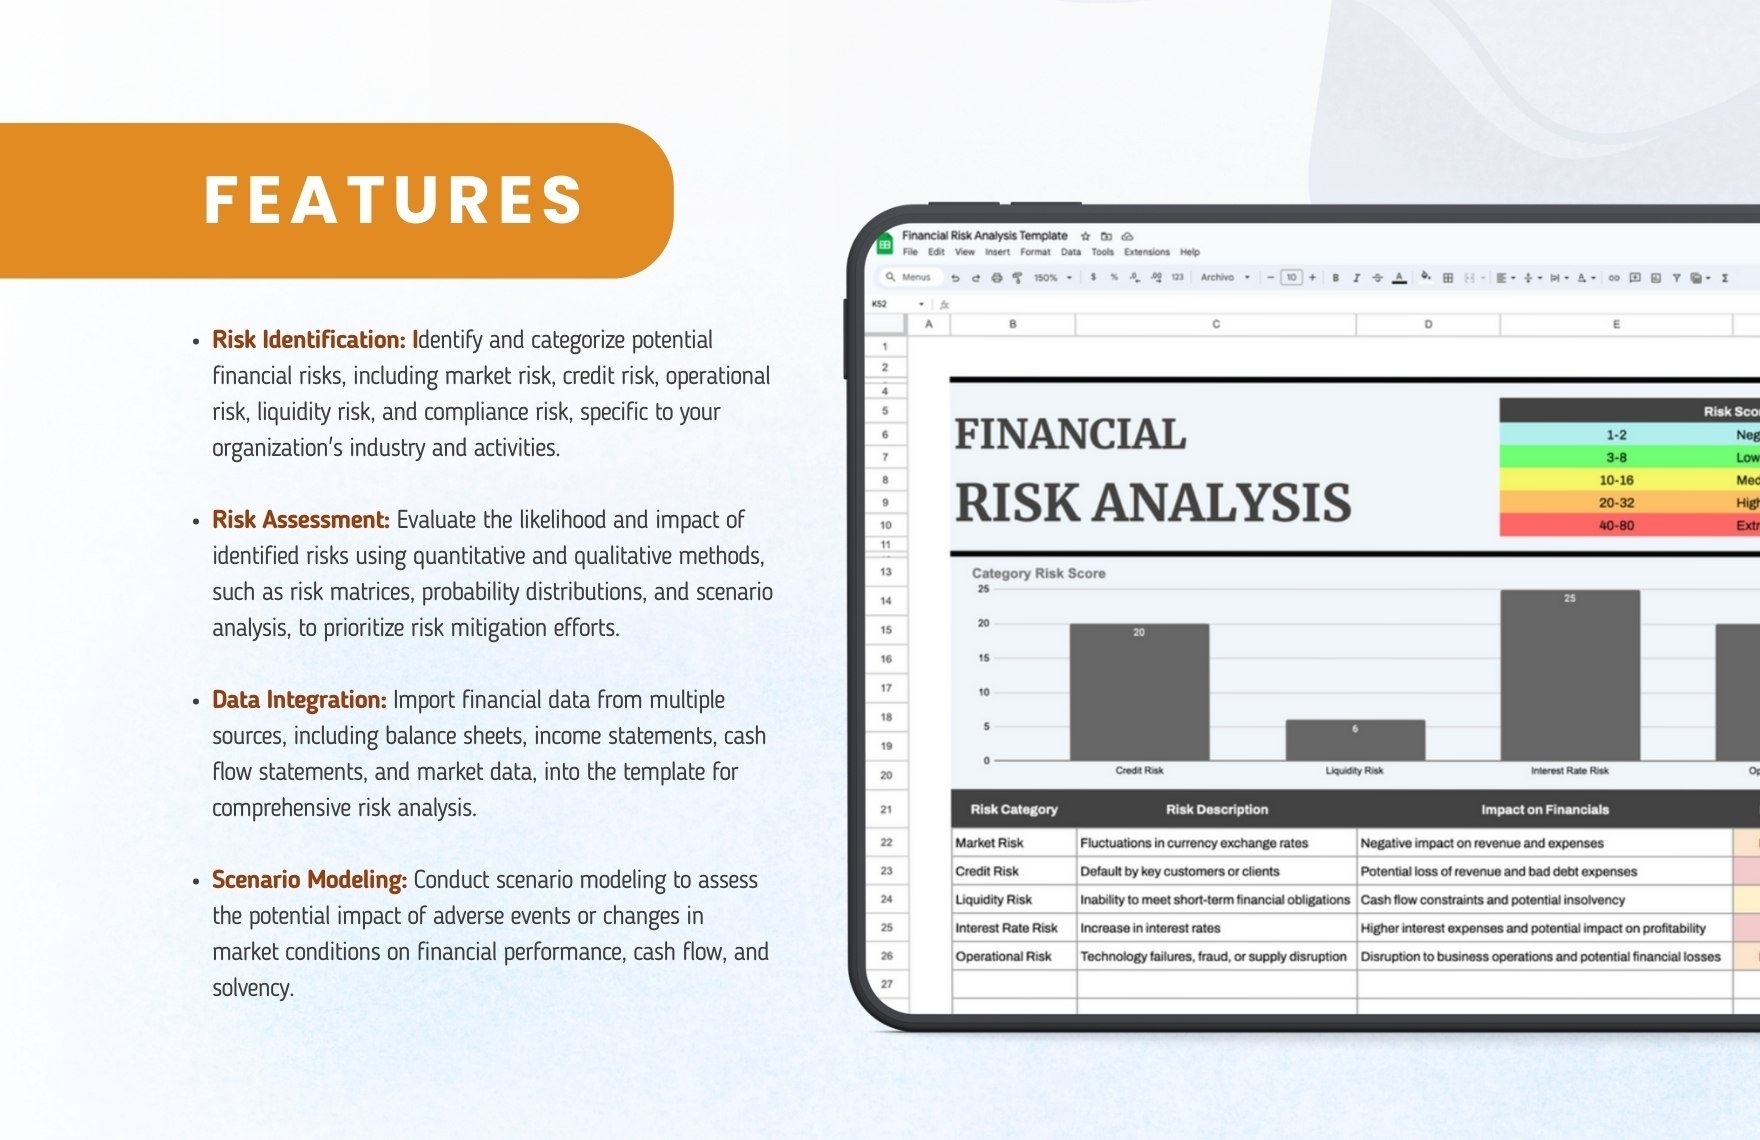 Financial Risk Analysis Template